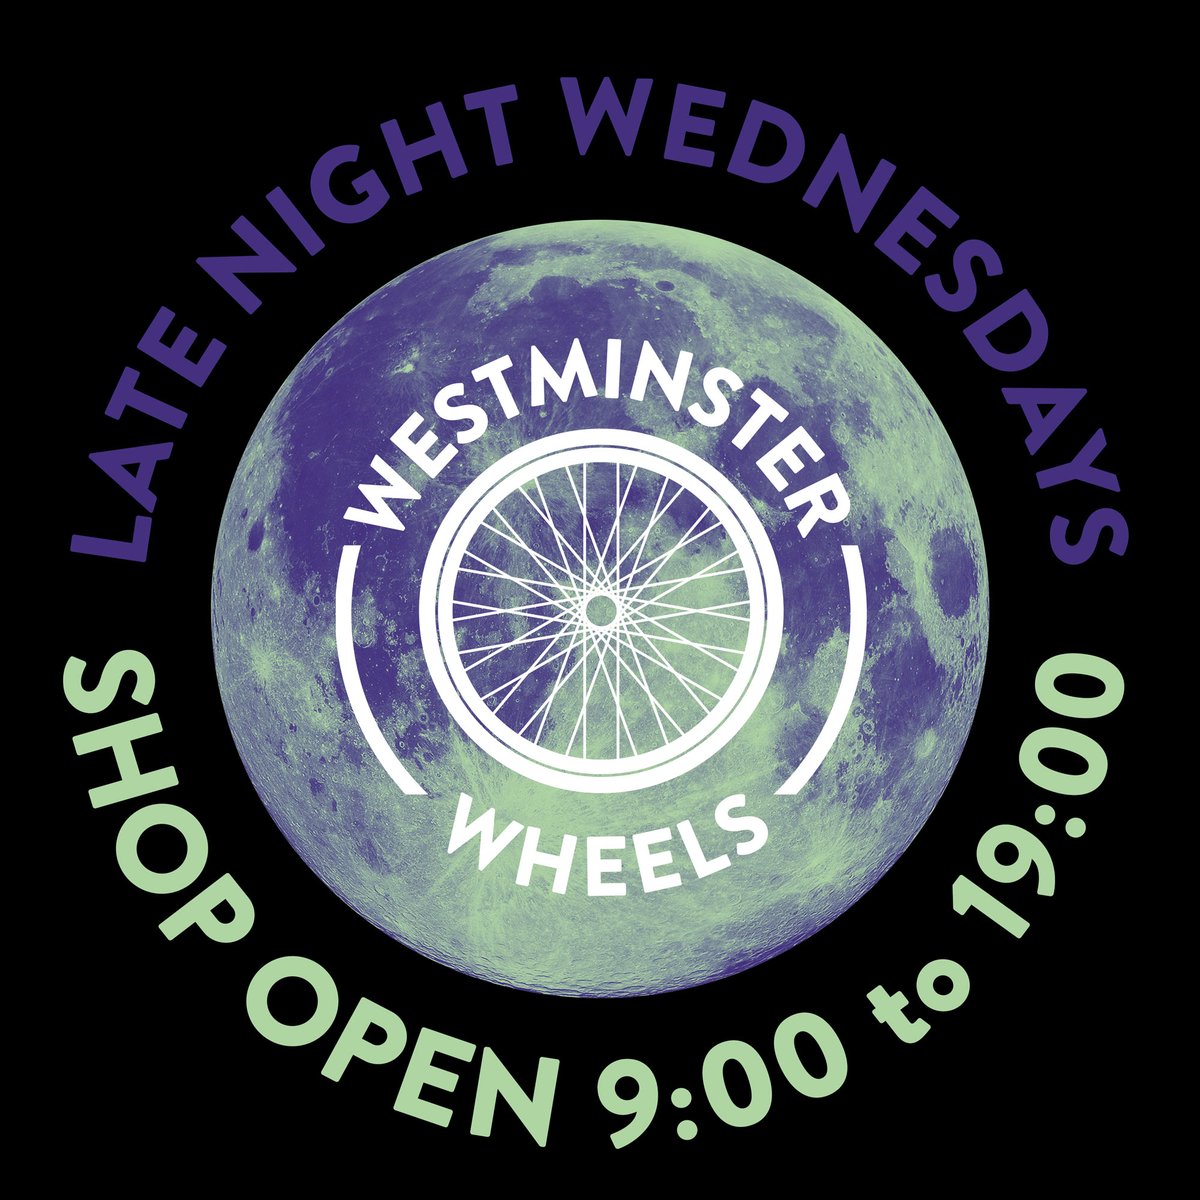 Still need to service your bike but everywhere is shut? Not us: we're still OPEN! It's #LateNightWednesday & that means Westminster Wheels is open until 7pm! Drop off your bike for repair. Pick up your fixed bike. Chat to our wonderful team - you do YOU! westminsterwheels.co.uk/contact-us/